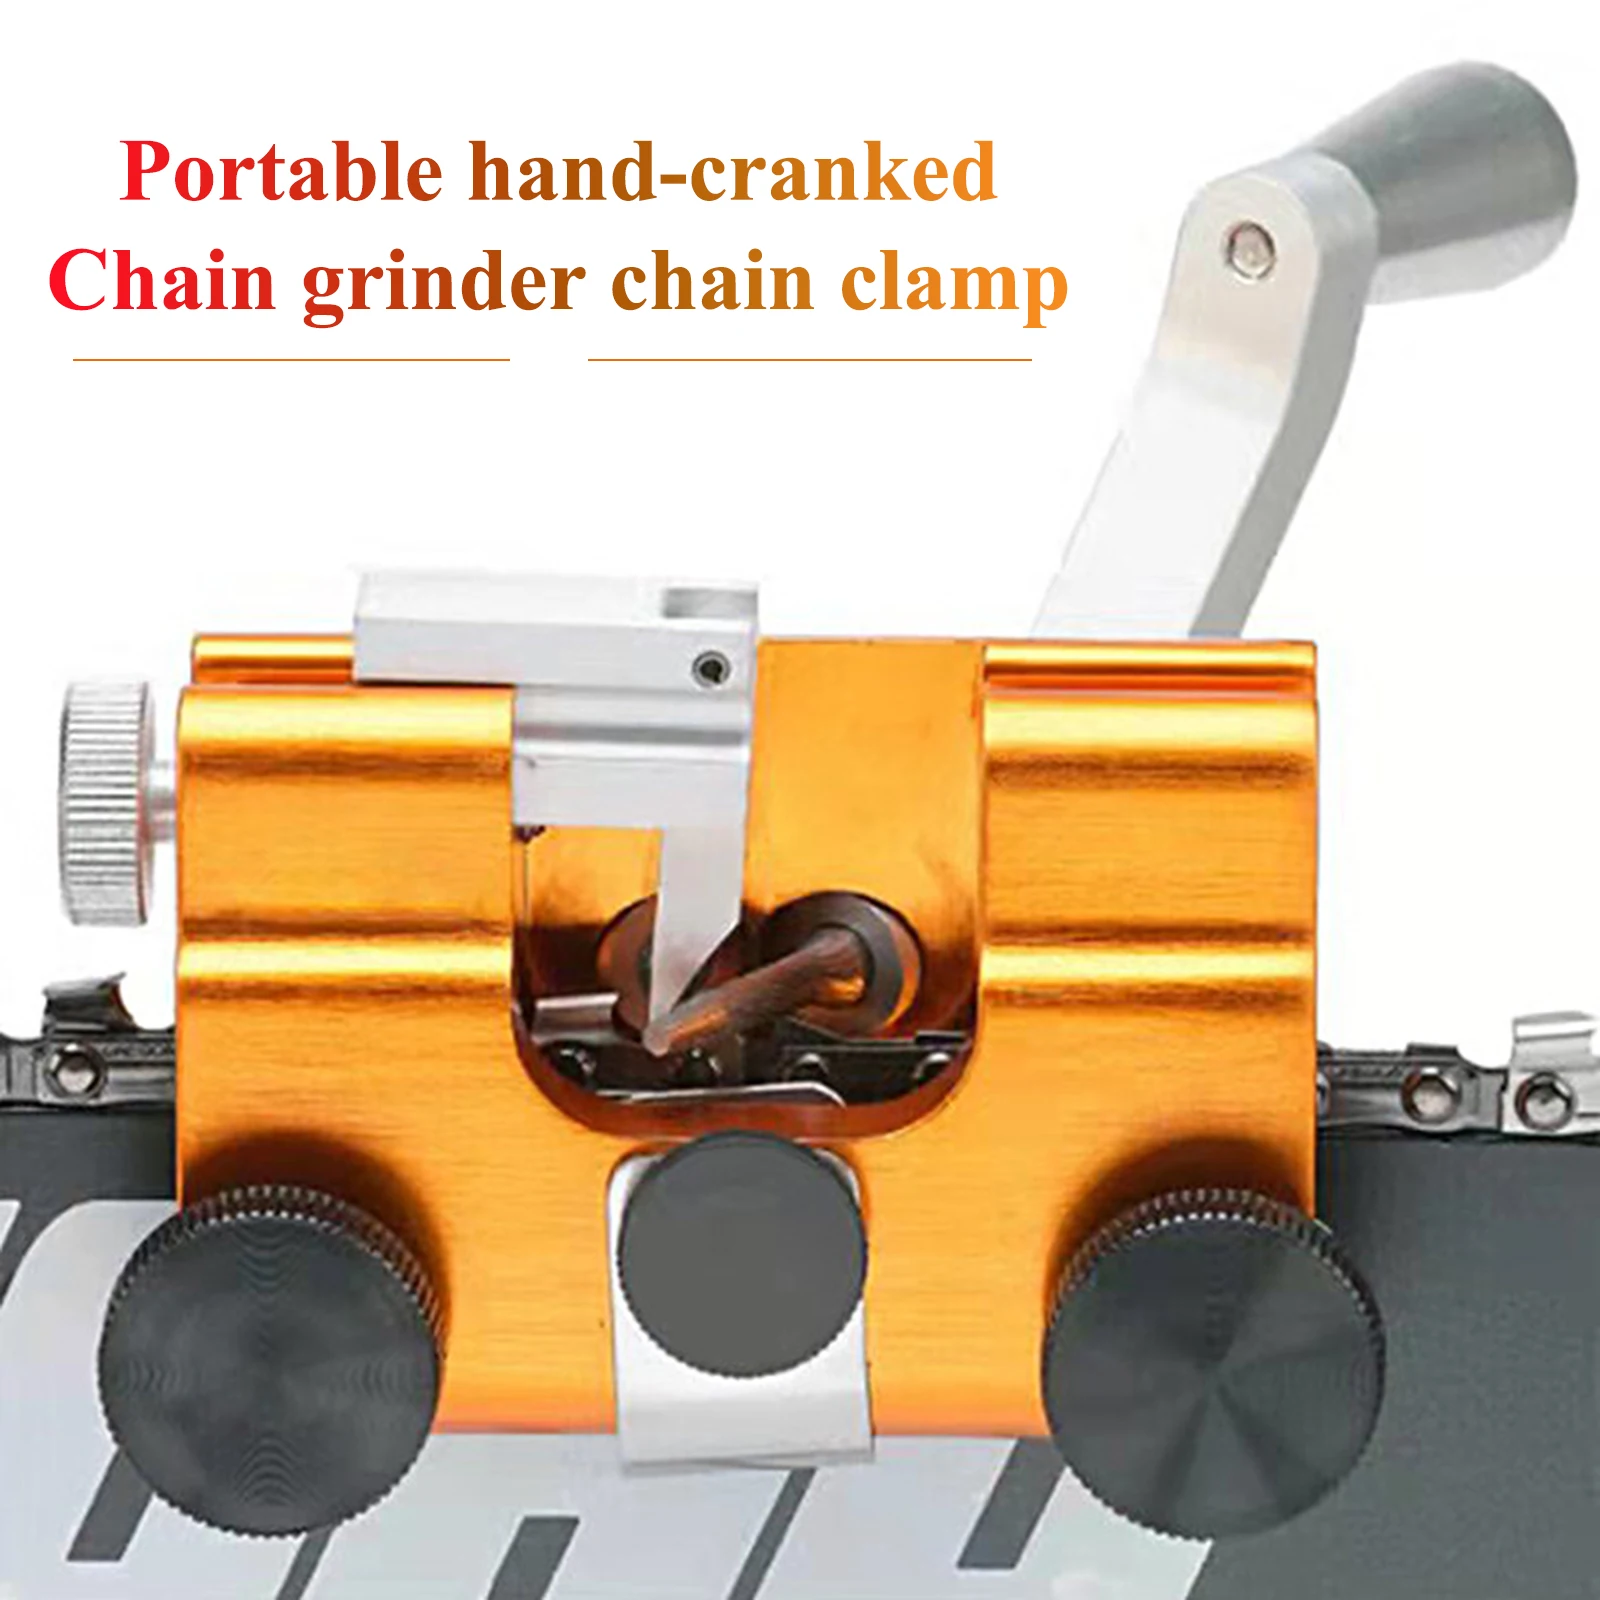 

Portable Hand Crank Chainsaw Easy-to-use Chain Saw Sharpener Suitable All Kinds Of Chainsaws Chainsaw Cranked Chain Sharpeners